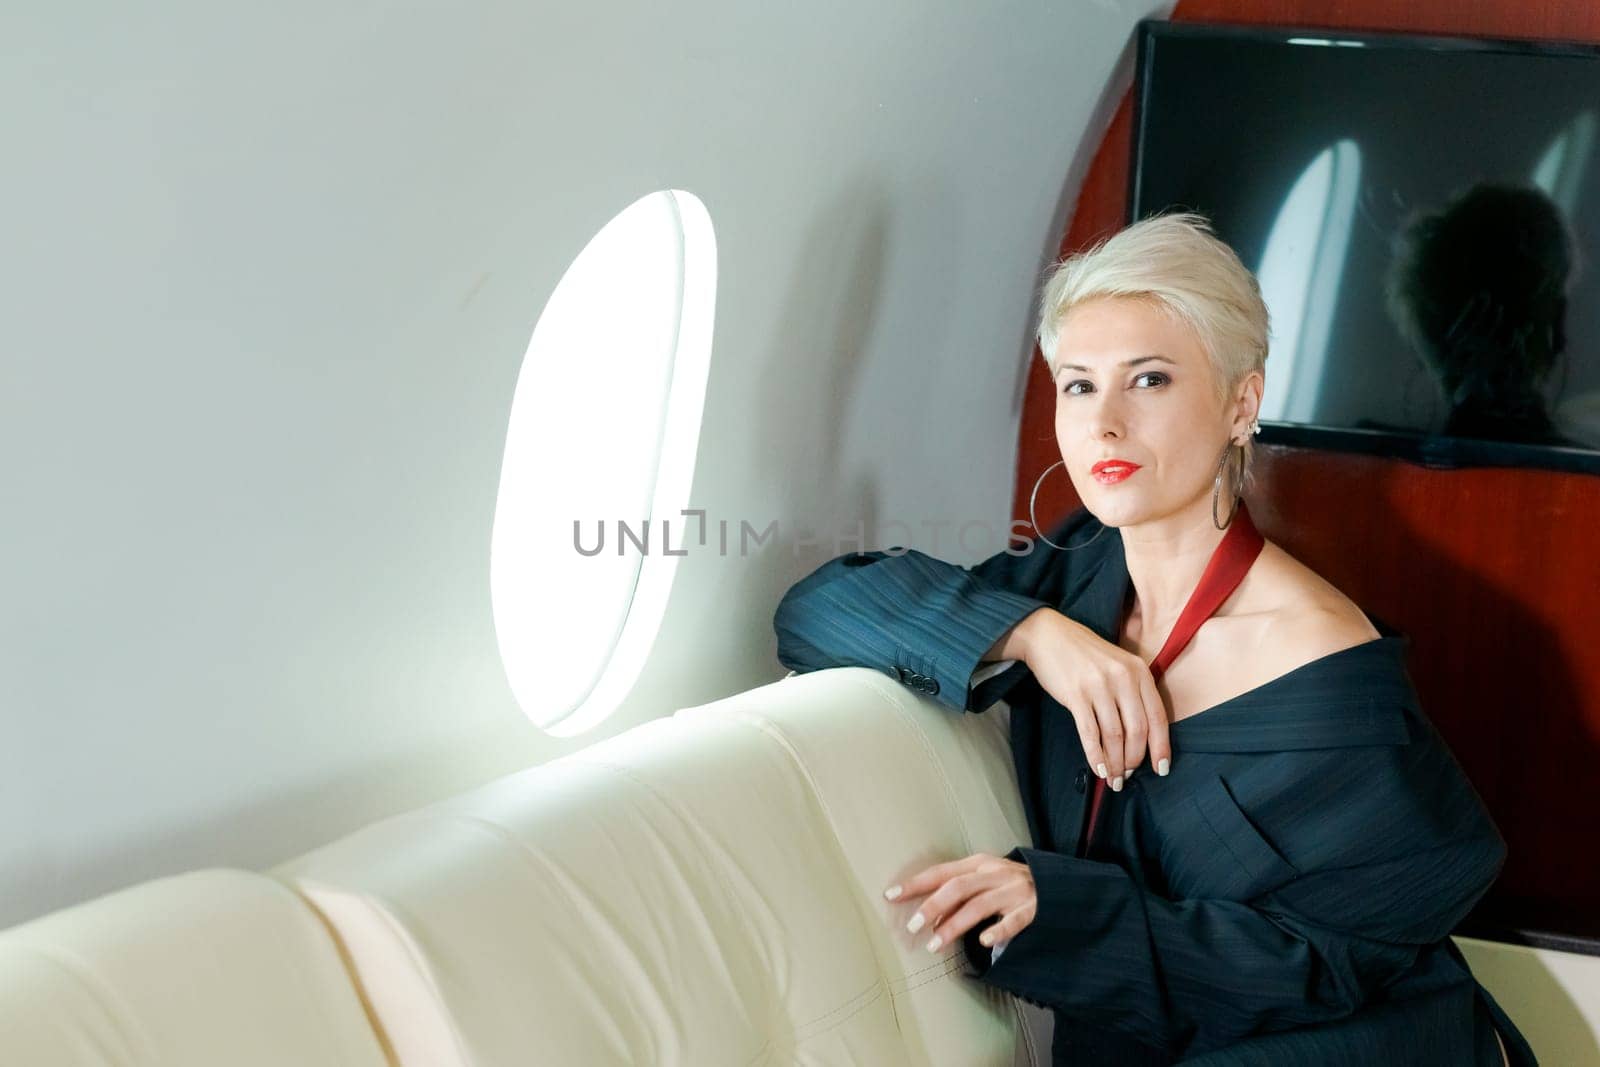 Woman private plane in a jacket with a red tie, New Year's Eve flight, holiday and travel concept